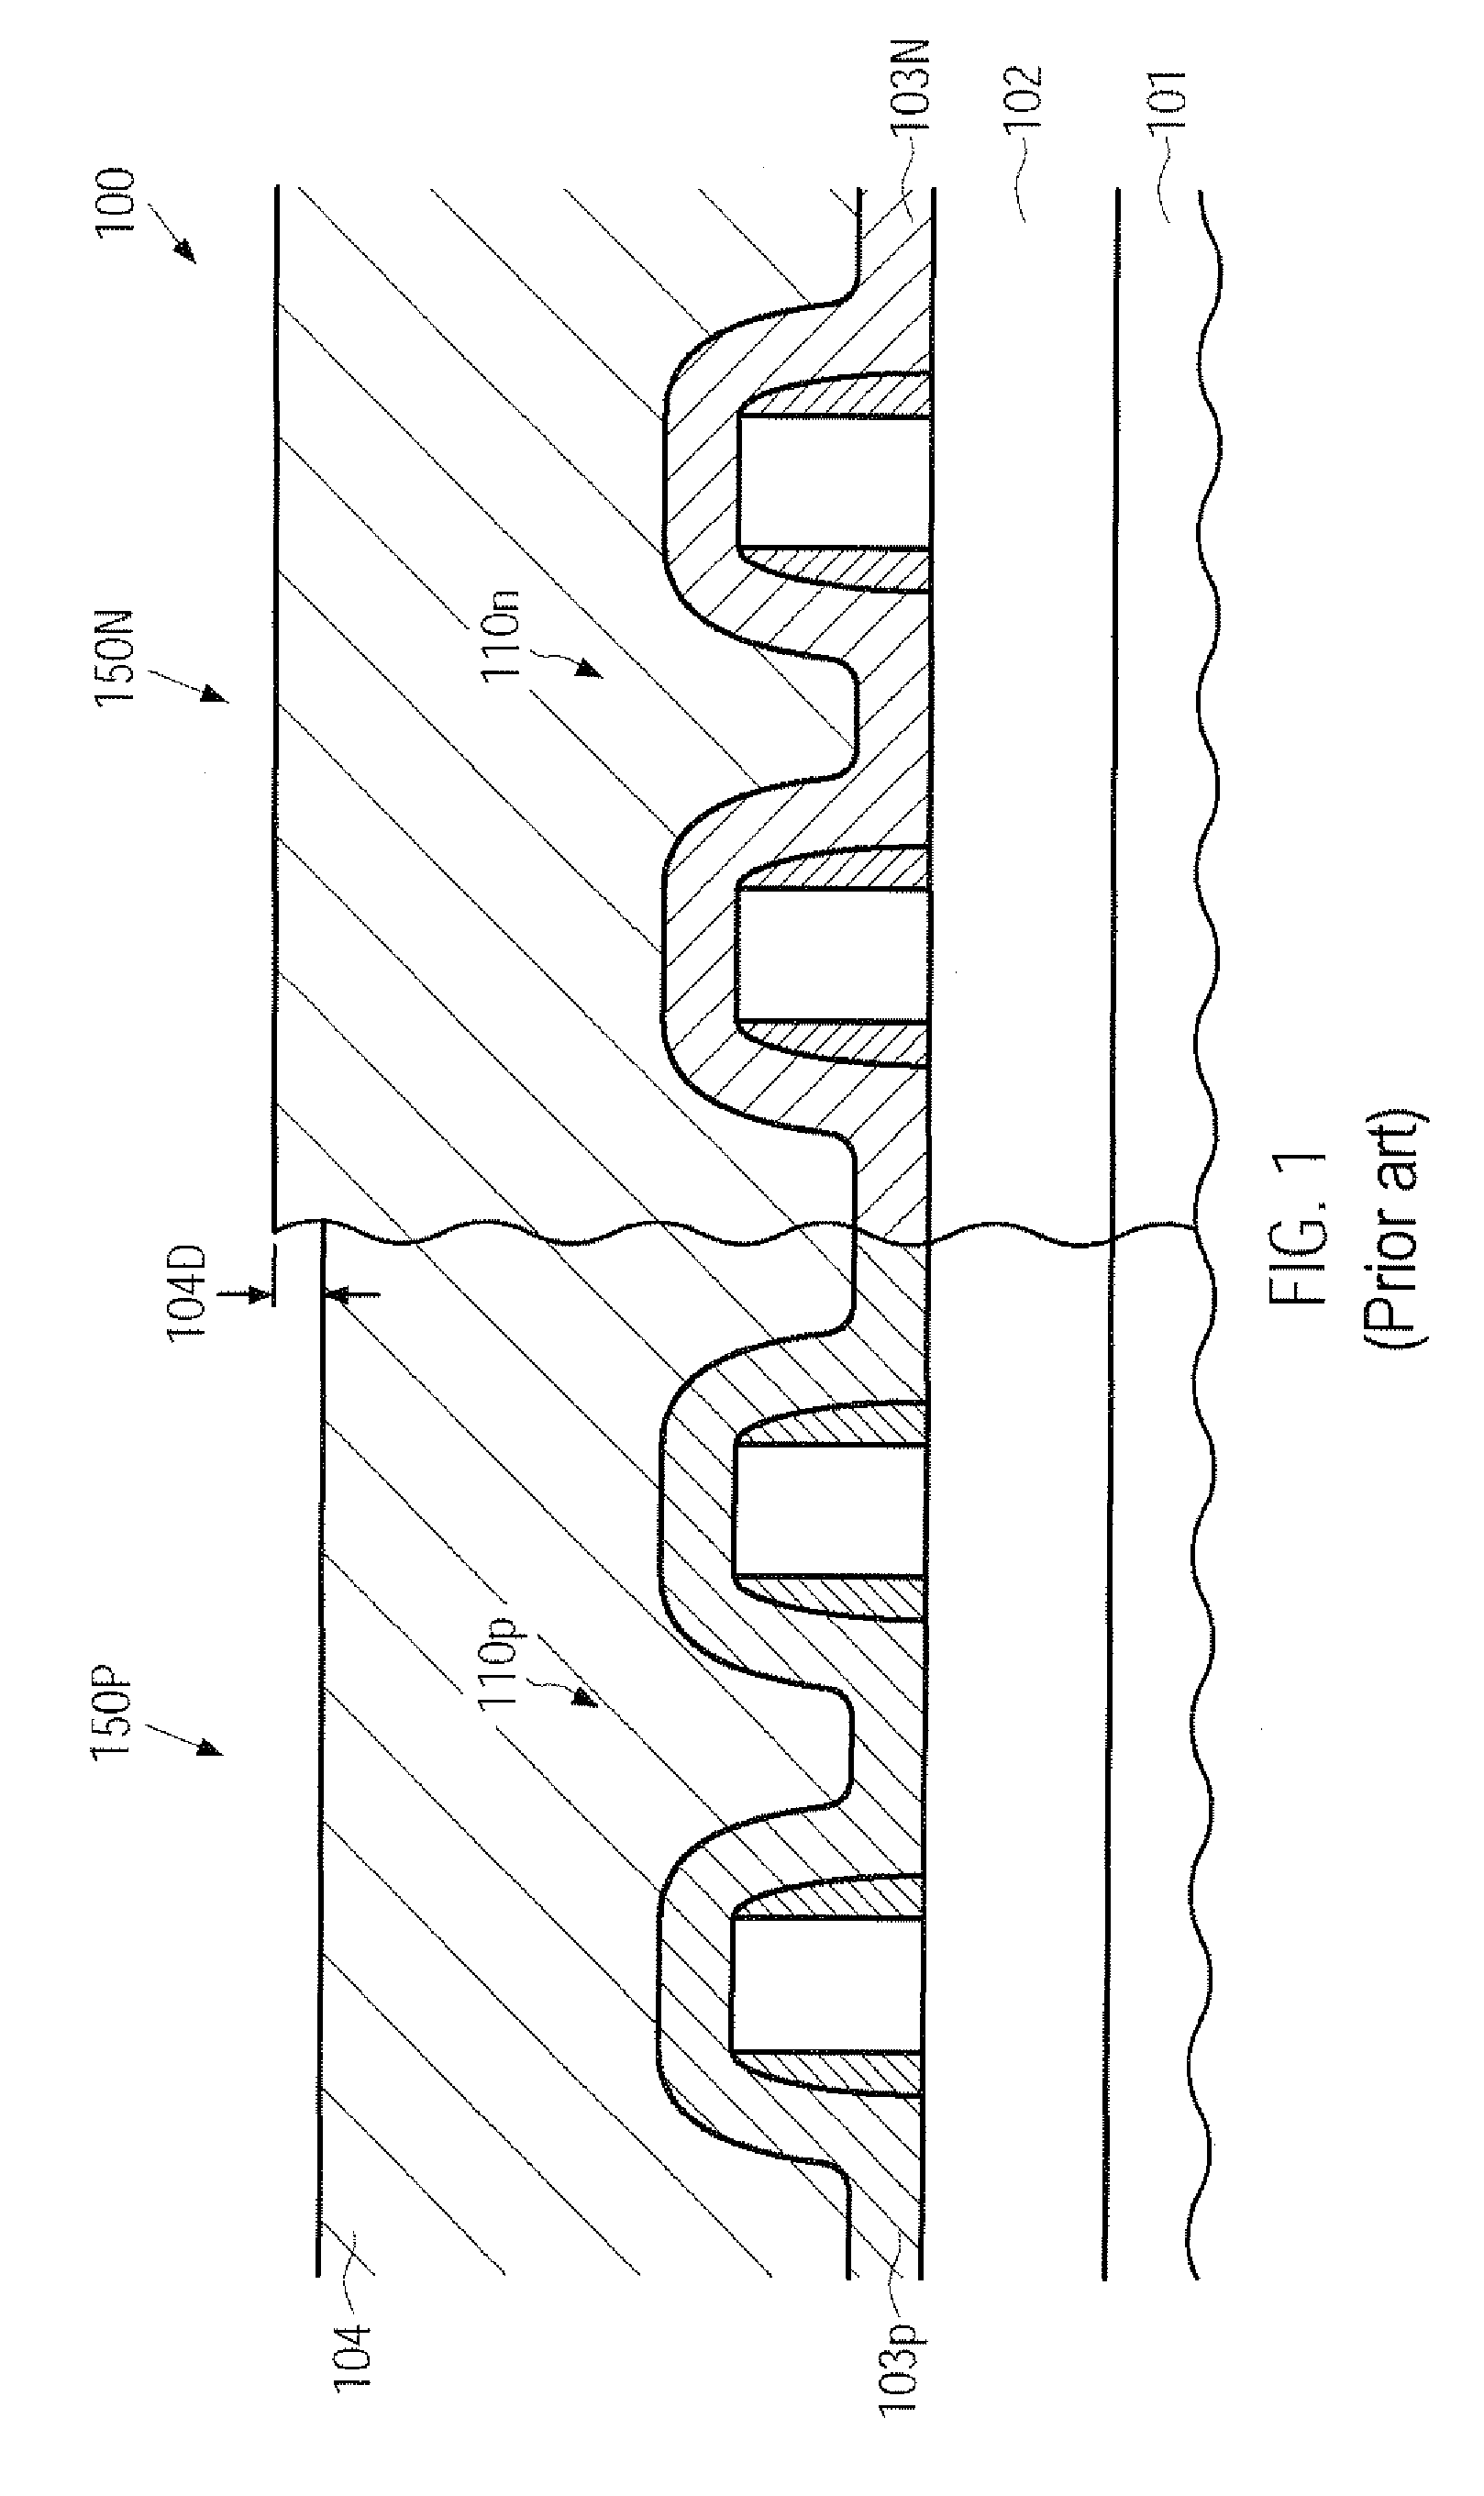 Technique for compensating for a difference in deposition behavior in an interlayer dielectric material